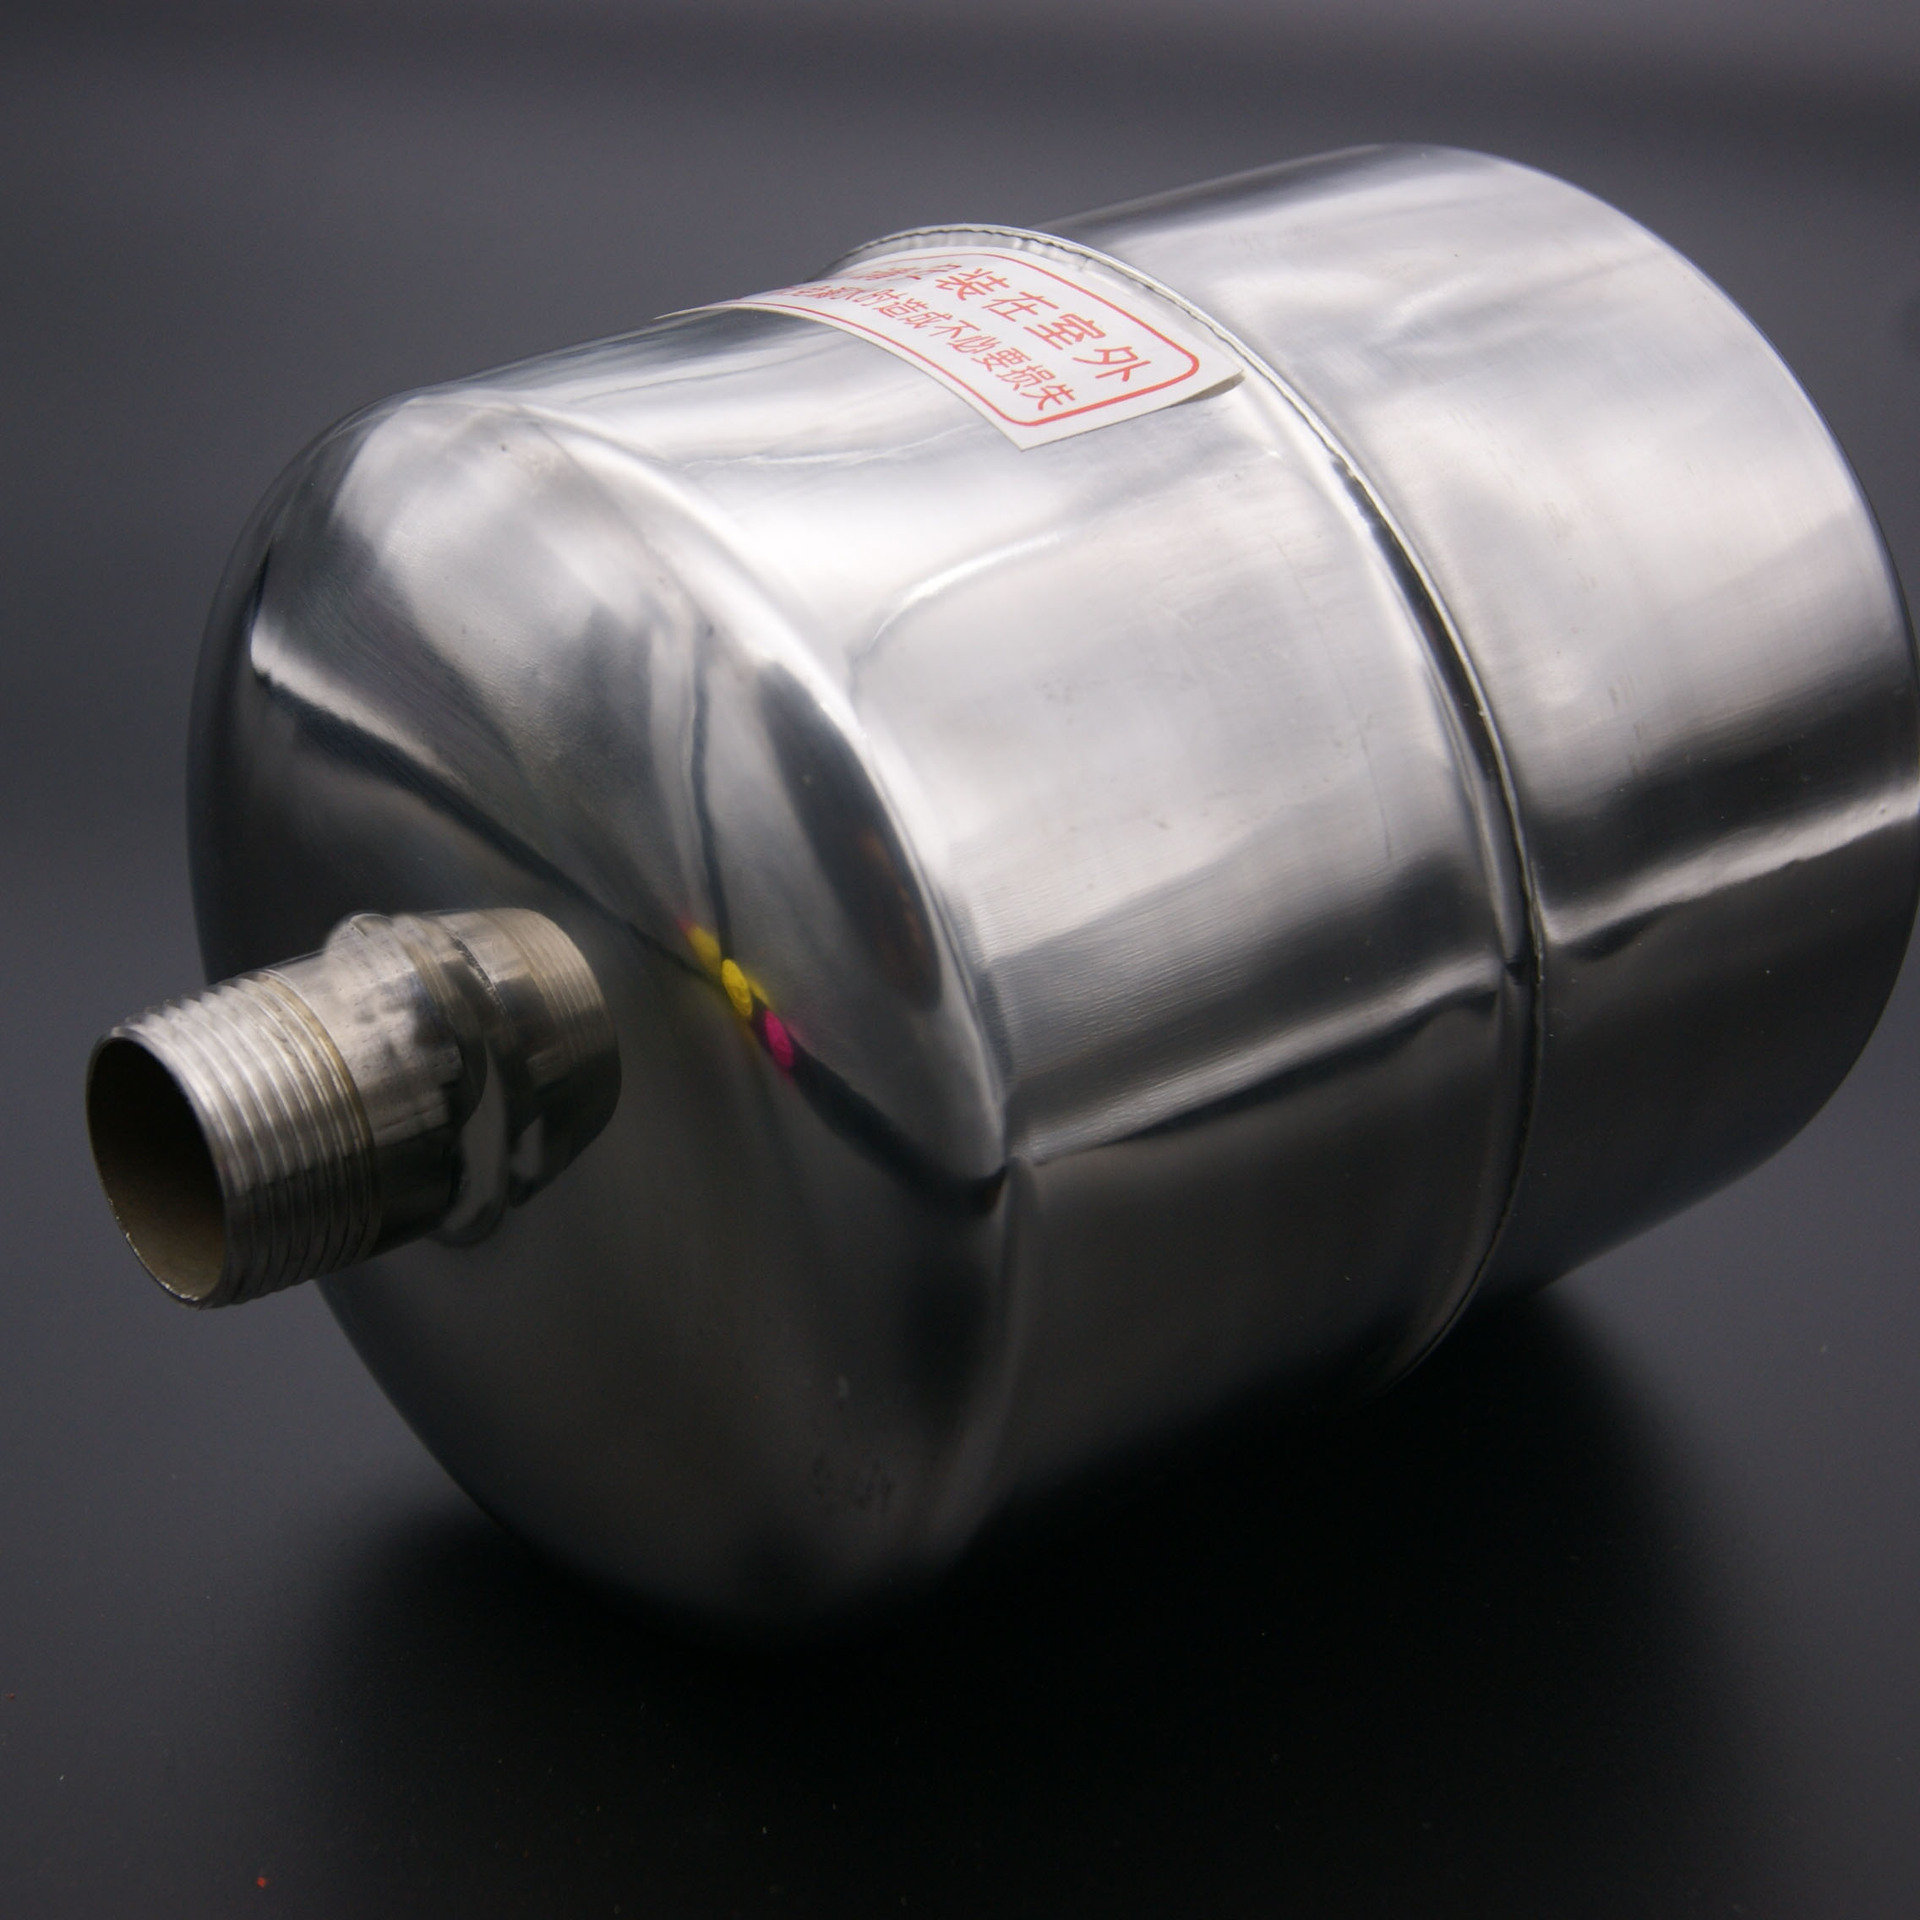 Manufacturers Supply a Large Number of Small Stainless Steel Tank Water Pump Pressure Tank Stainless Steel Pressure Tank Pressure Package